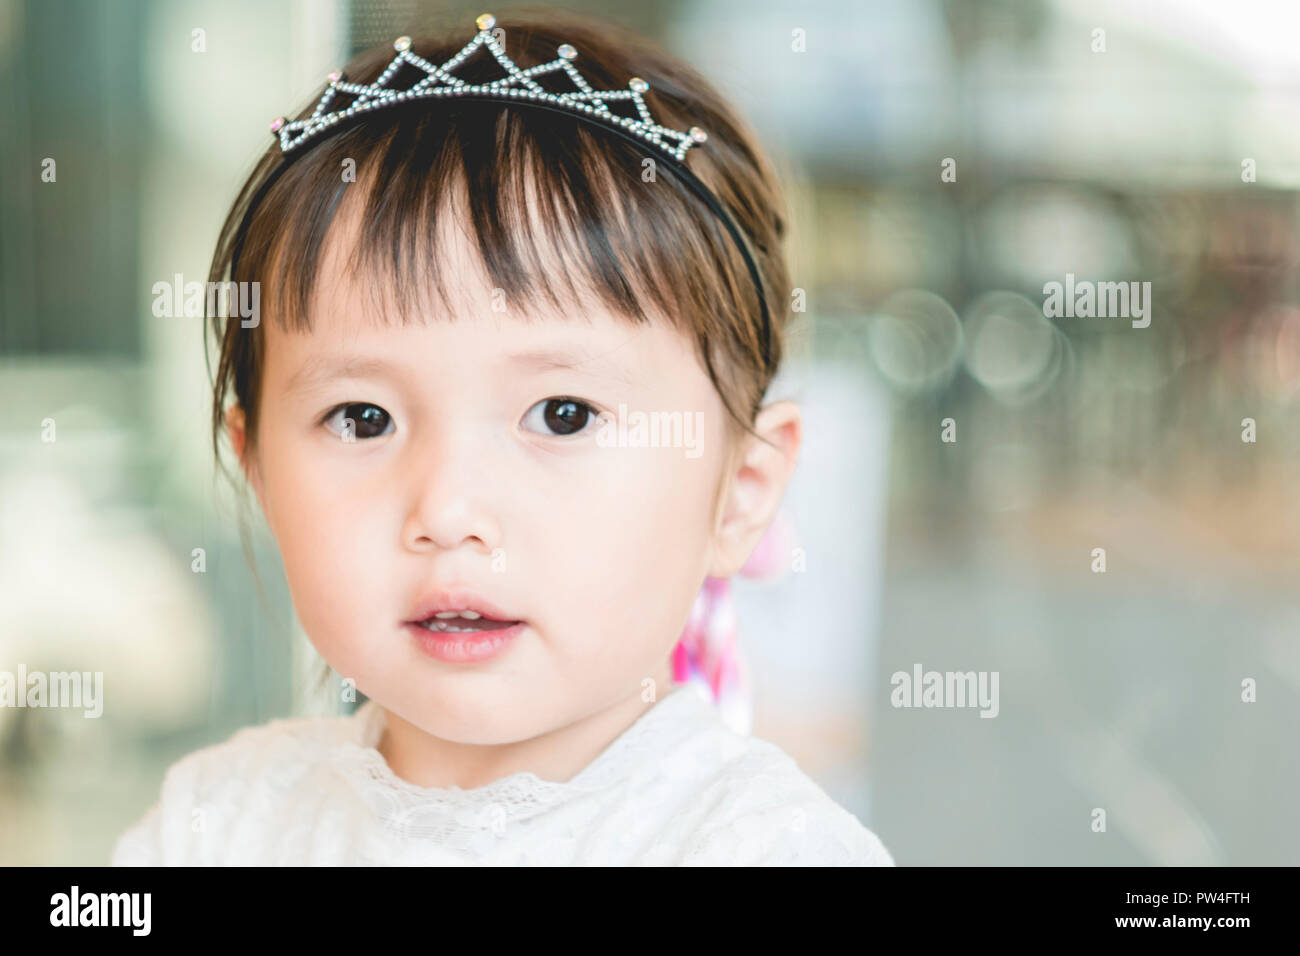 Little girl funny smiling face,portrait of joyful asian child adorable lovely looking at camera with smile Stock Photo